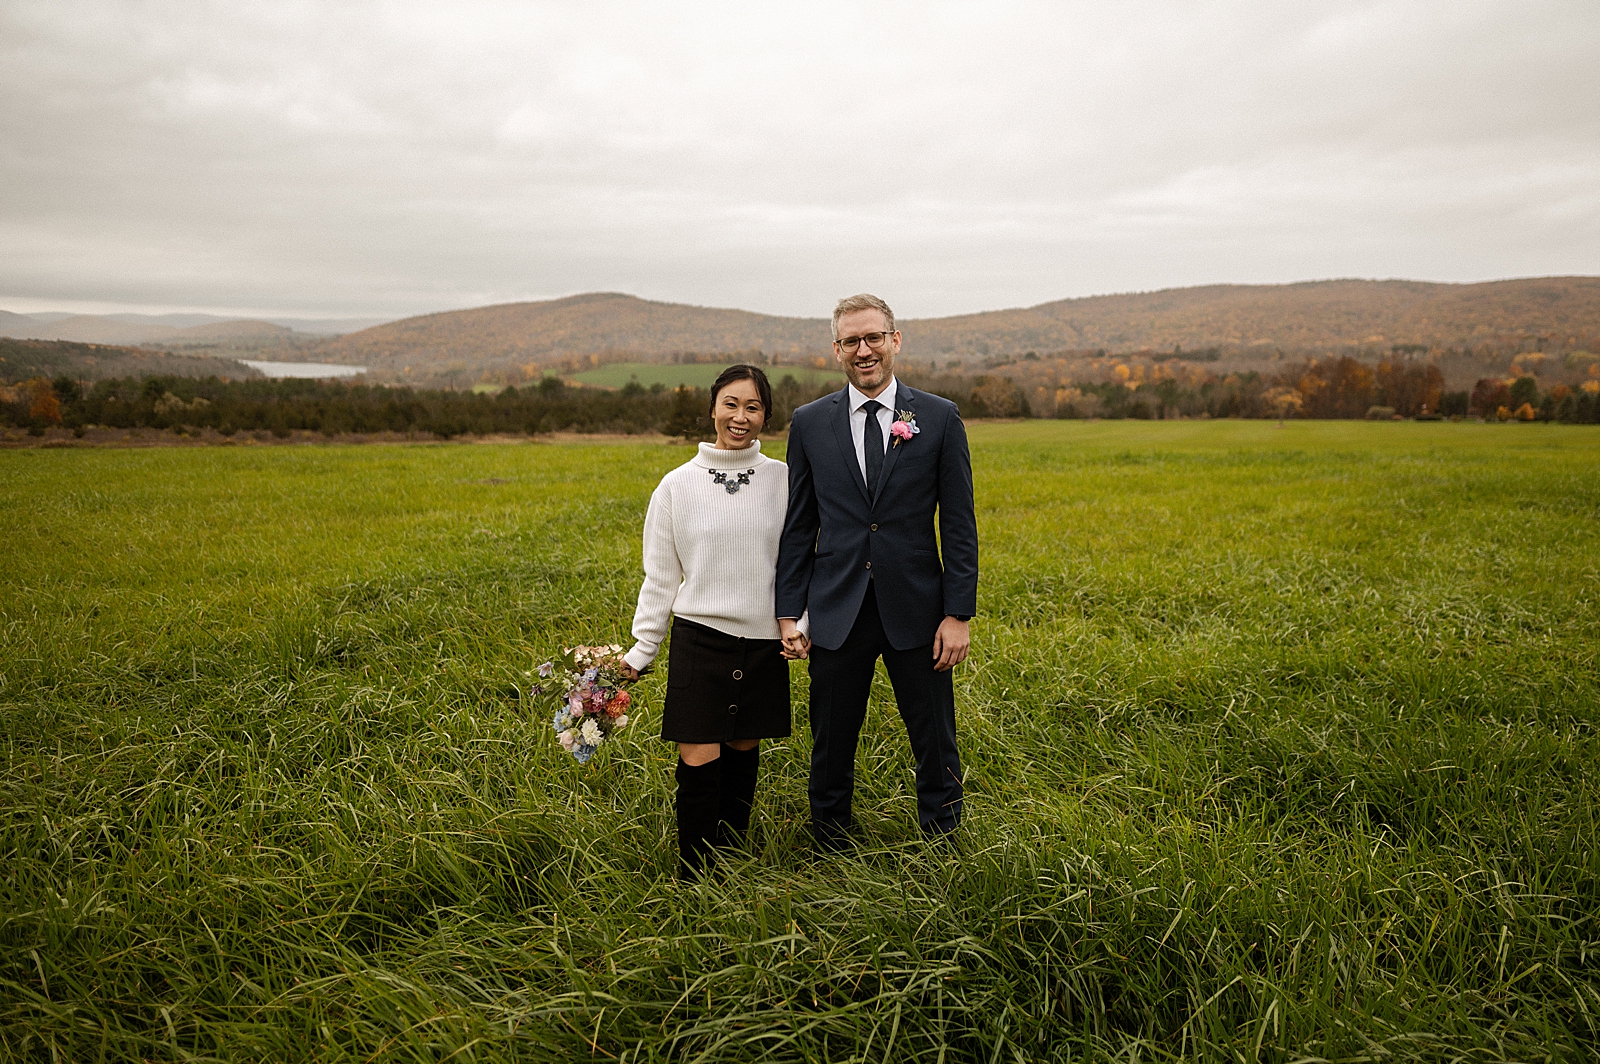 Bride and Groom holding hands on grassy field